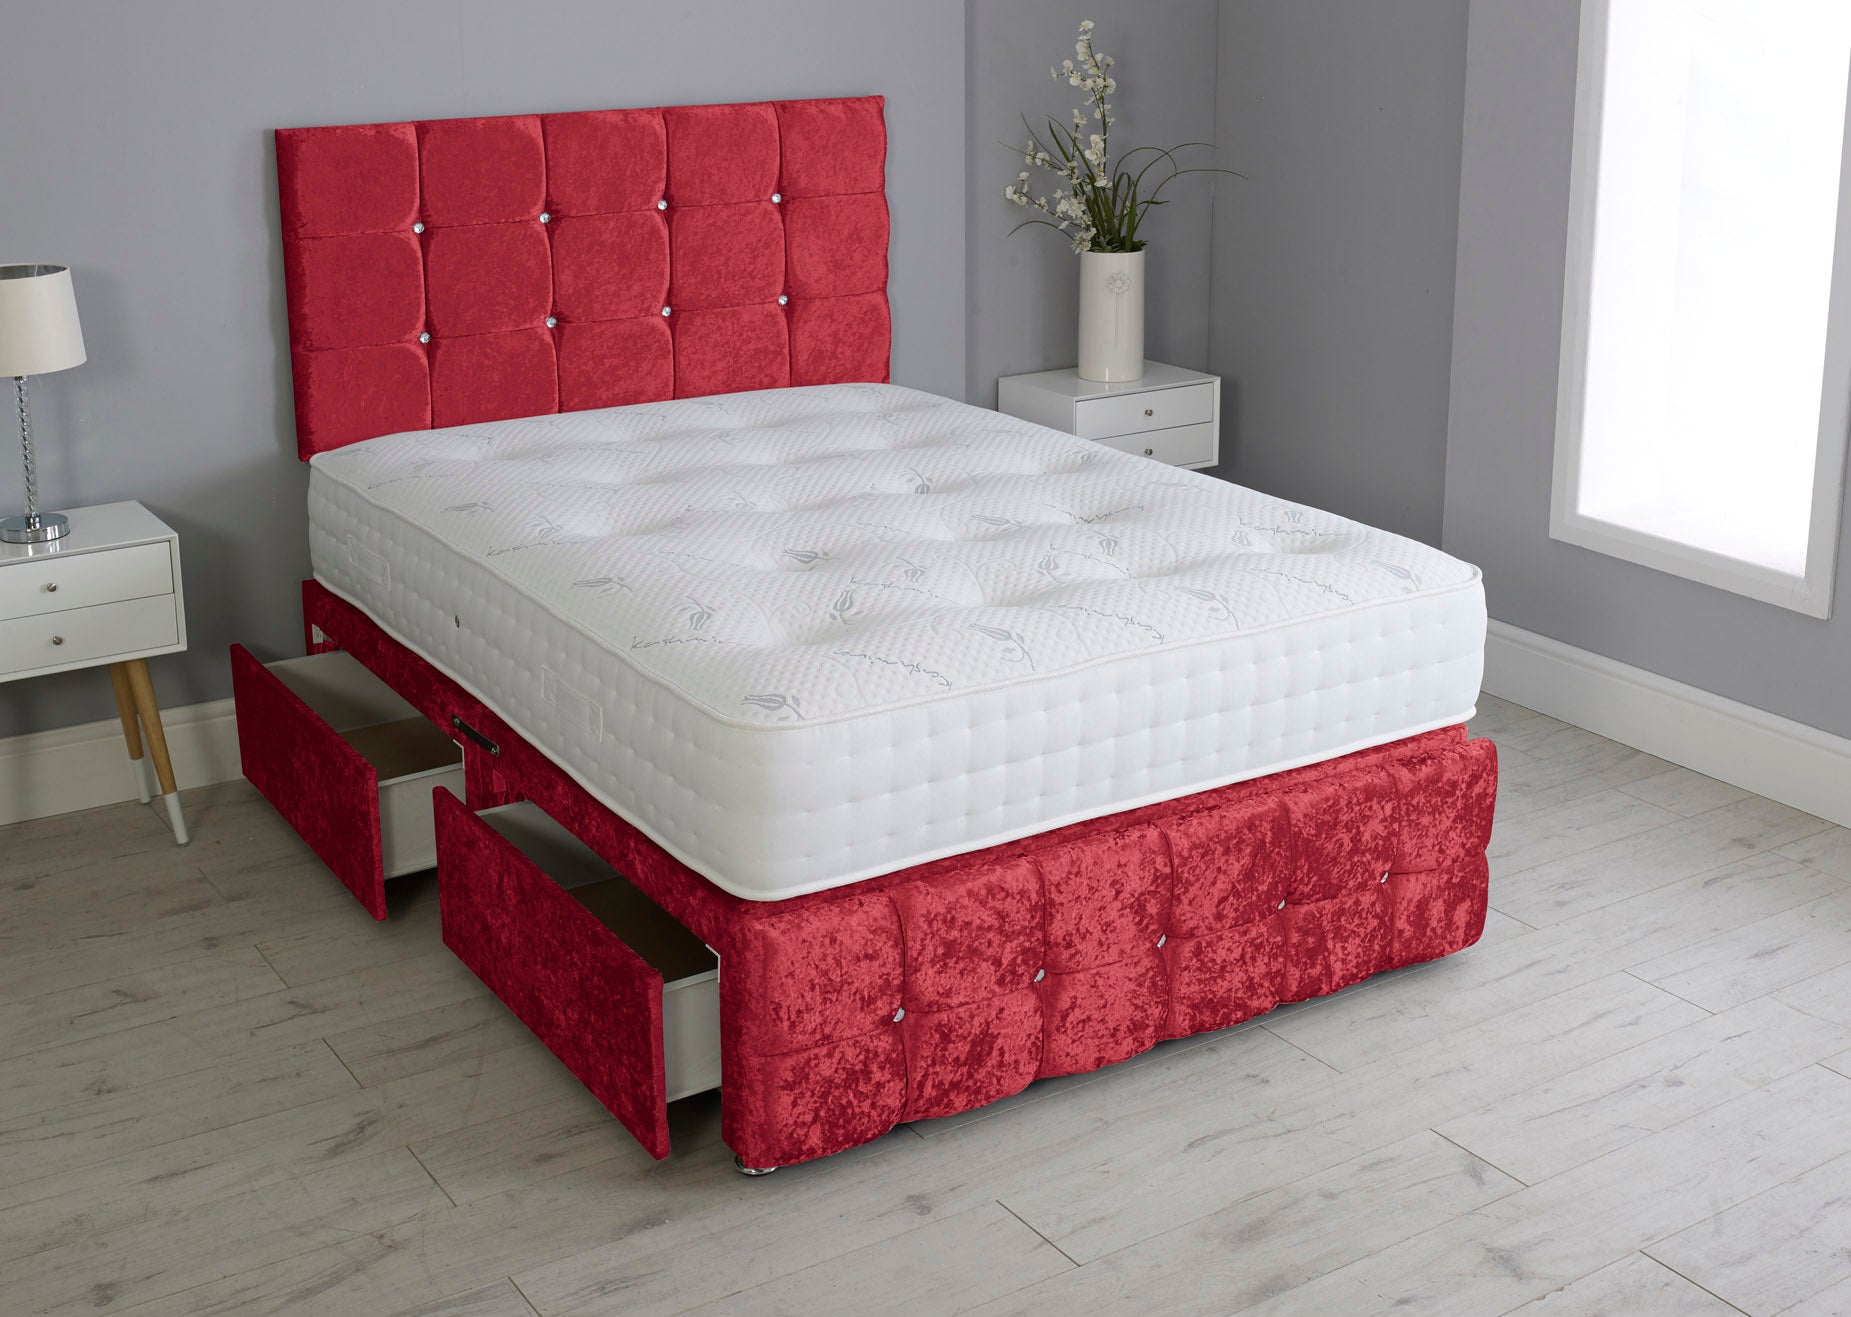 Cuboid Cube Divan Bed With Mattress And Footboard And Pocket Memory Mattress